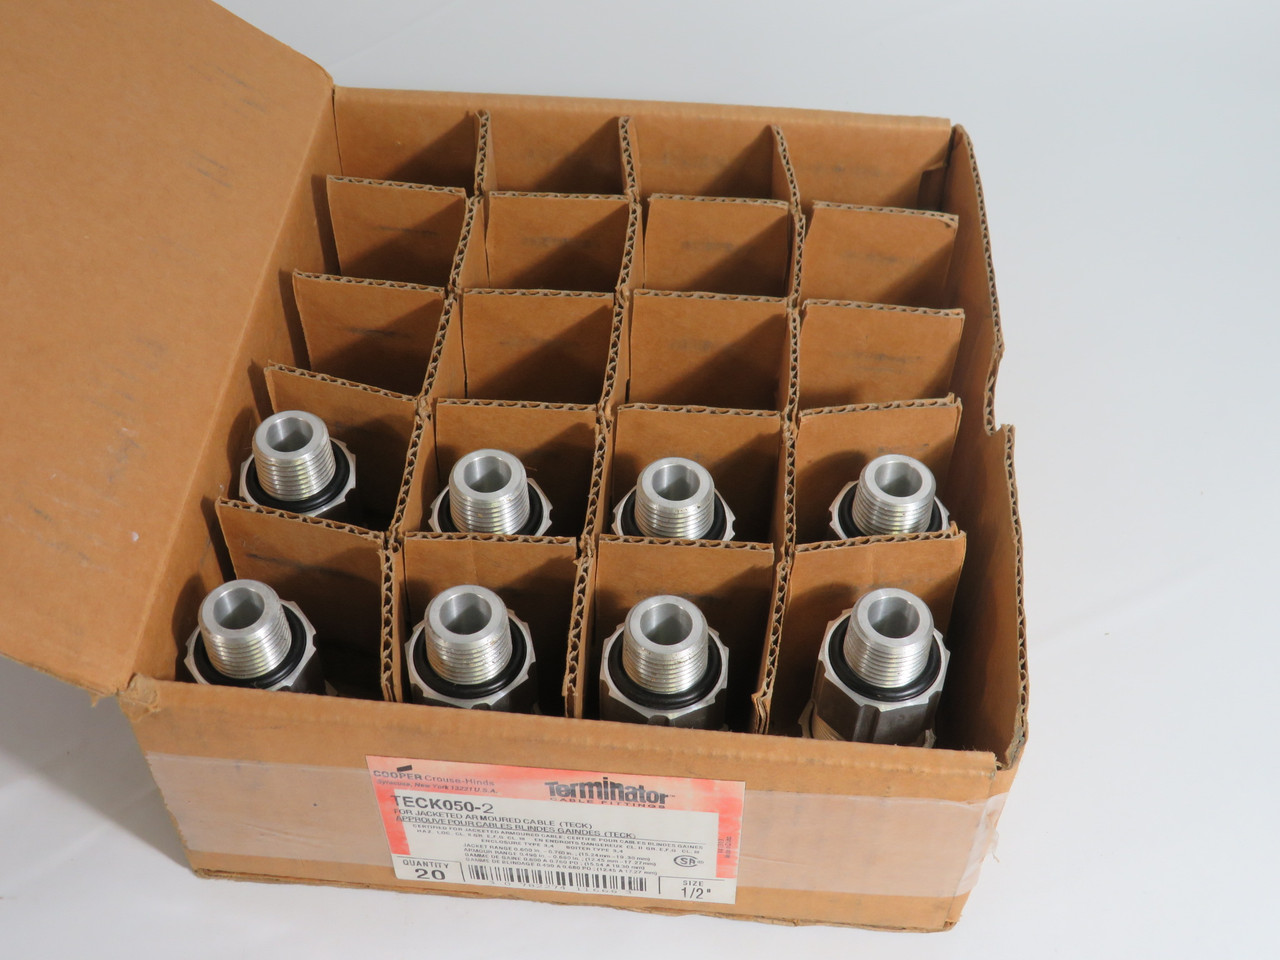 Crouse-Hinds TECK050-2 Cable Gland 1/2" NPT Lot of 8 NEW